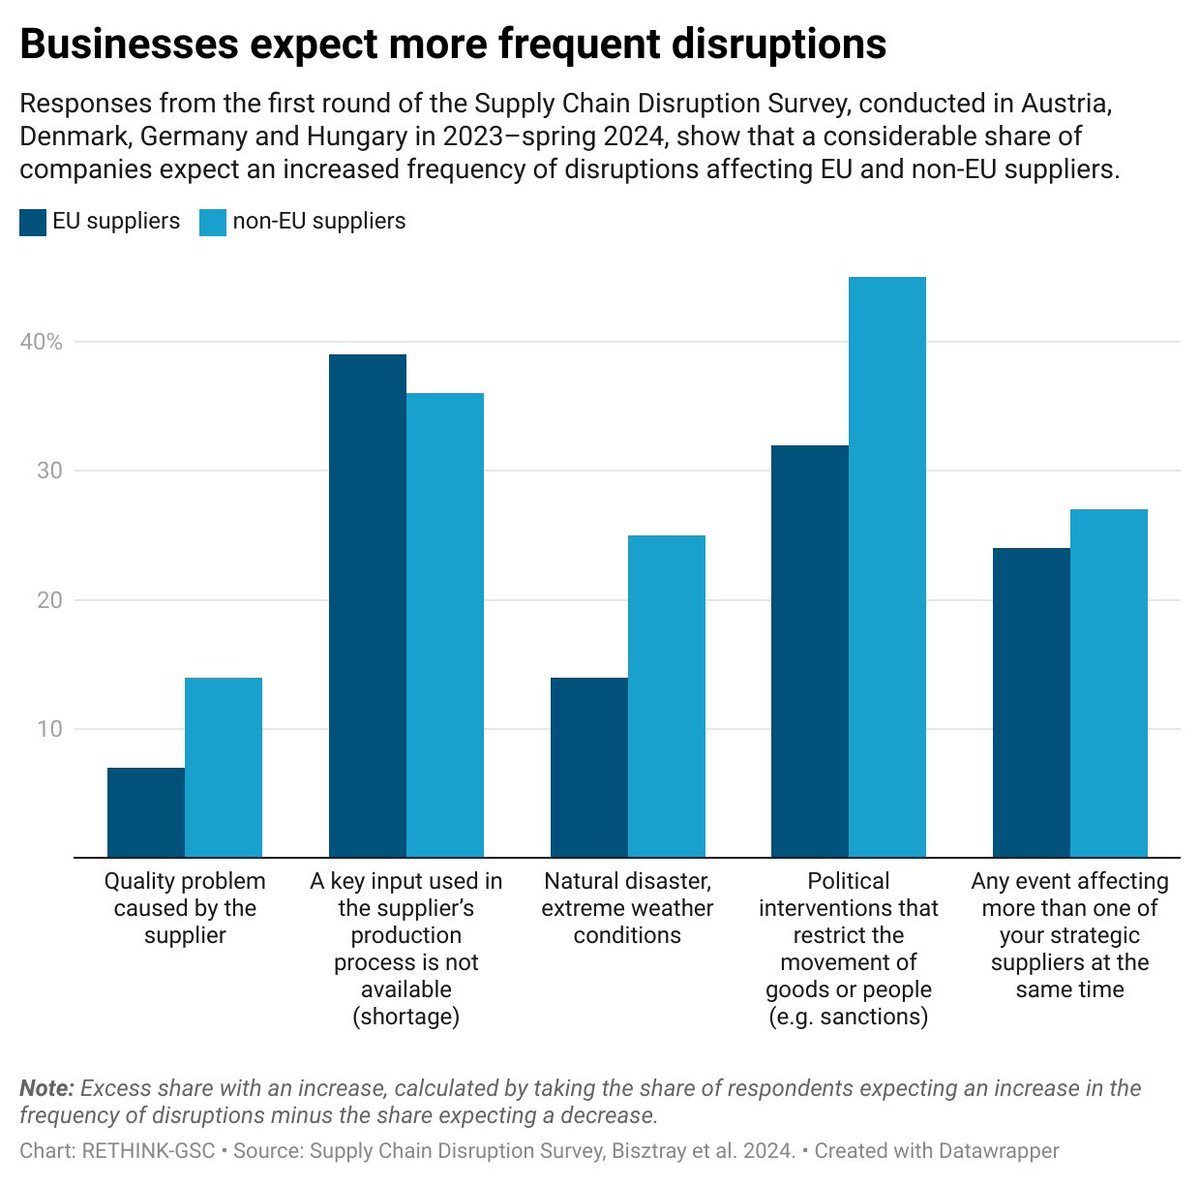 Businesses expect disruptions in #GlobalSupplyChains to increase — and many are considering sourcing more from 🇪🇺.

First findings of the RETHINK-GSC #SupplyChainDisruptionSurvey, conducted by @HunRenKrtkKti and @WIFOat in 🇦🇹,🇩🇰,🇩🇪 and 🇭🇺. 

Read more: rethink-gsc.eu/challenges-to-…